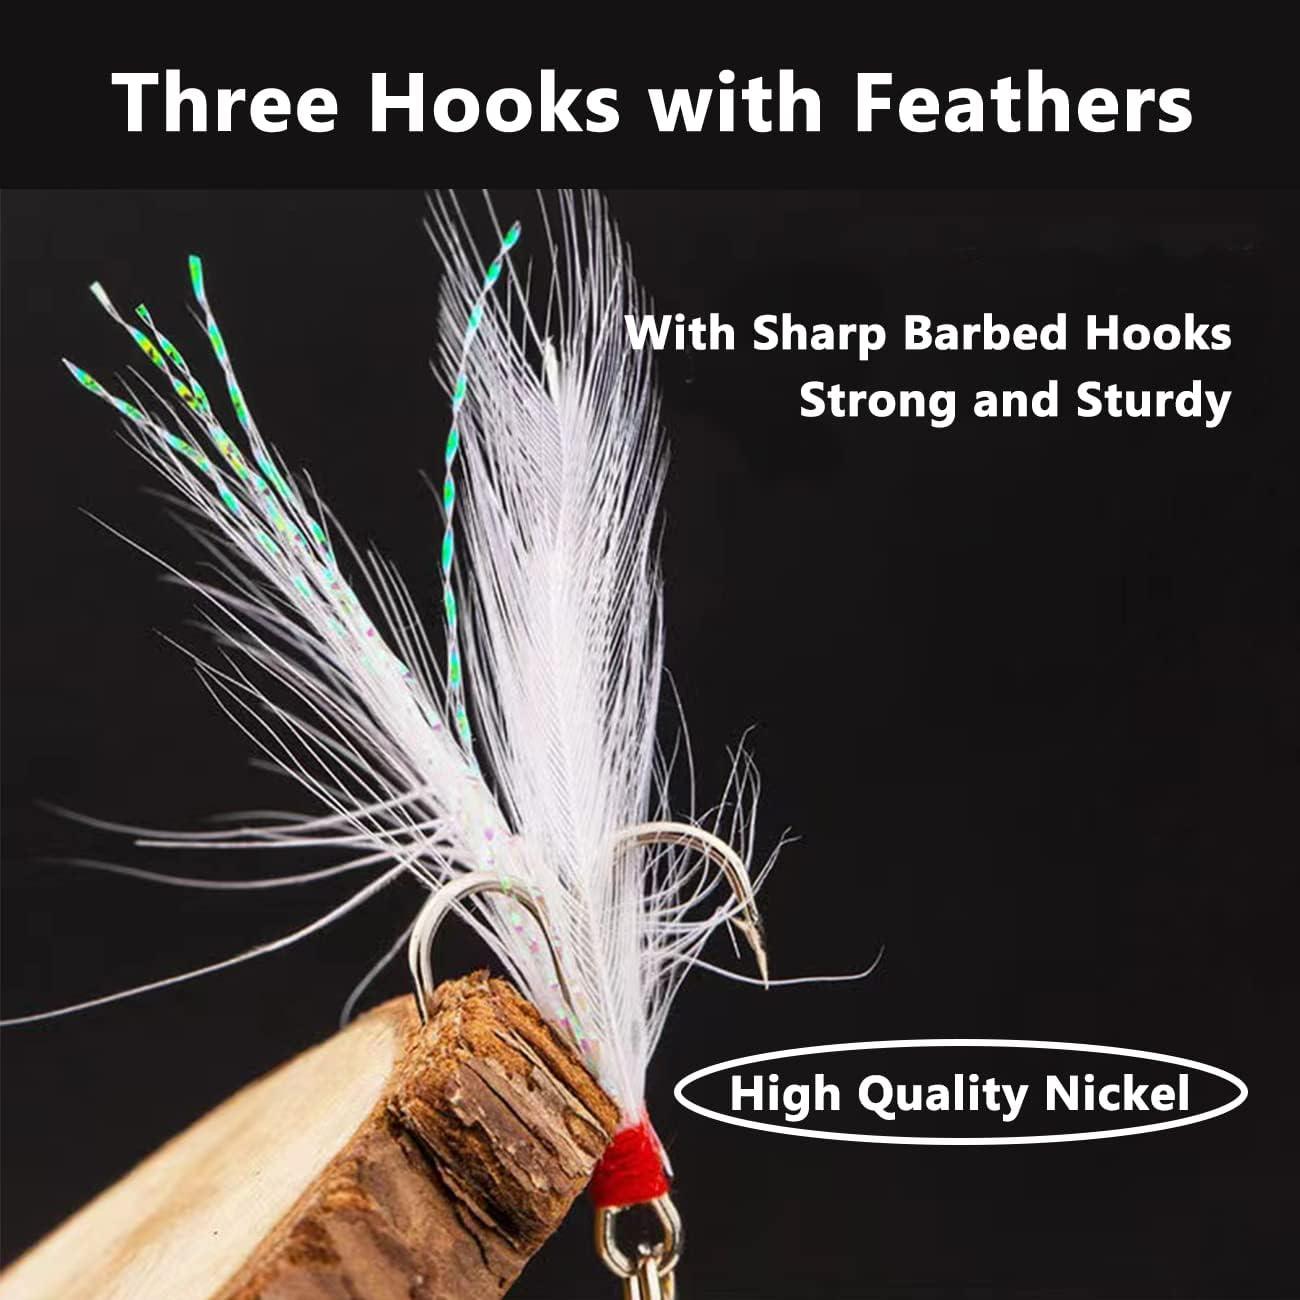 Bass Junkies Fishing Addiction: All dressed-up: Tips & Tricks for Feather  Dressing Treble Hooks